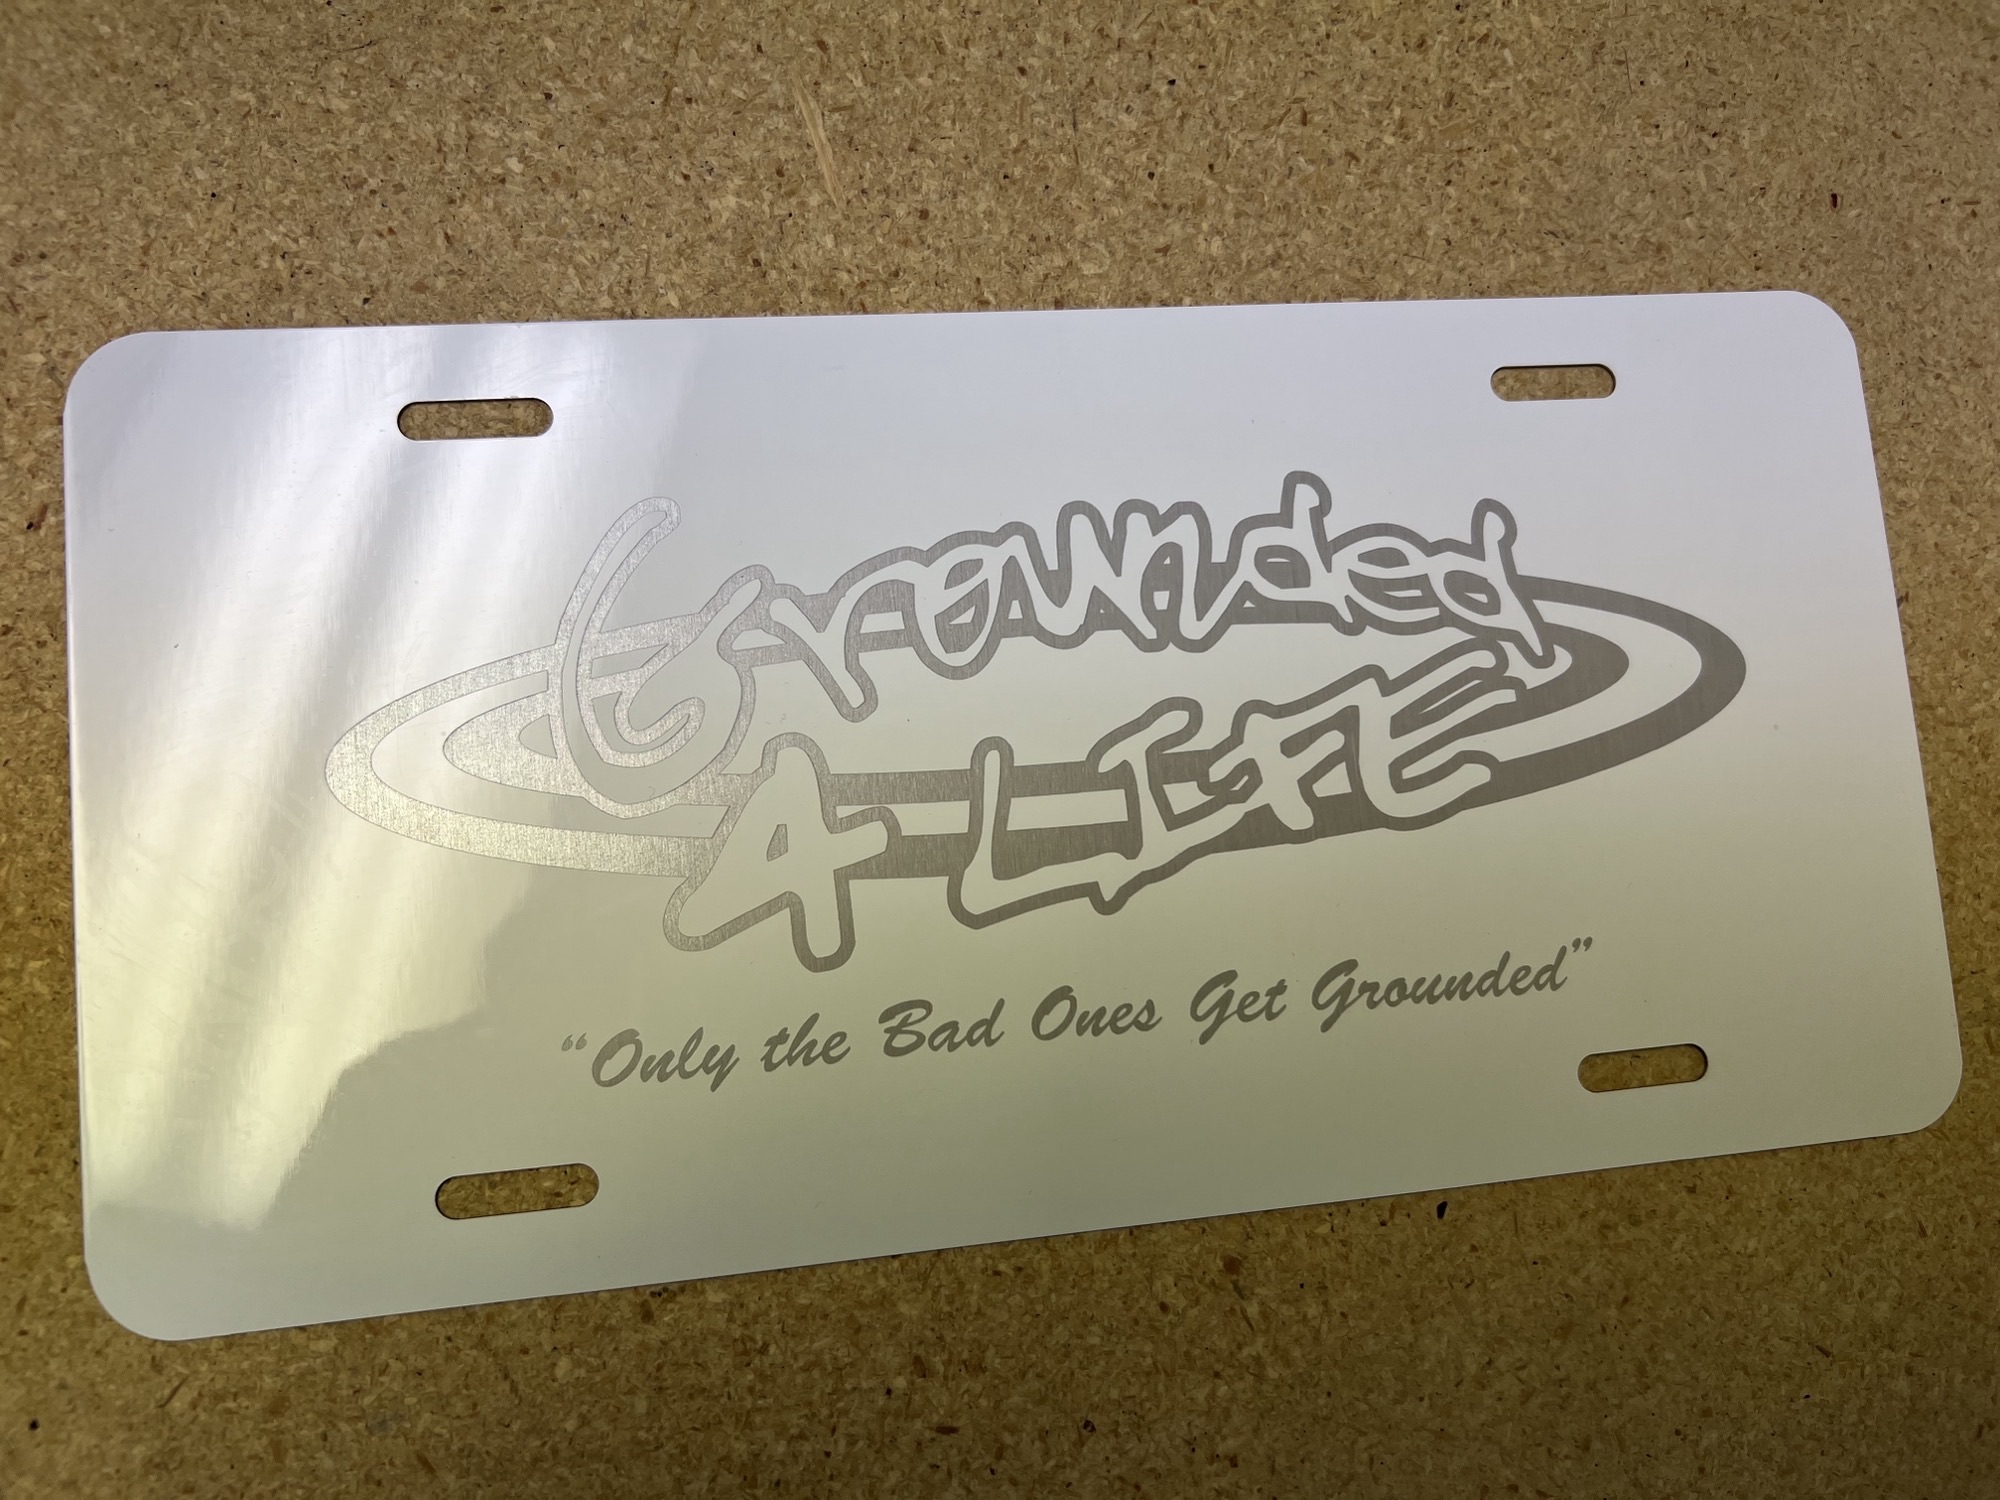 Grounded 4 Life - Stainless Steel License Plate - White